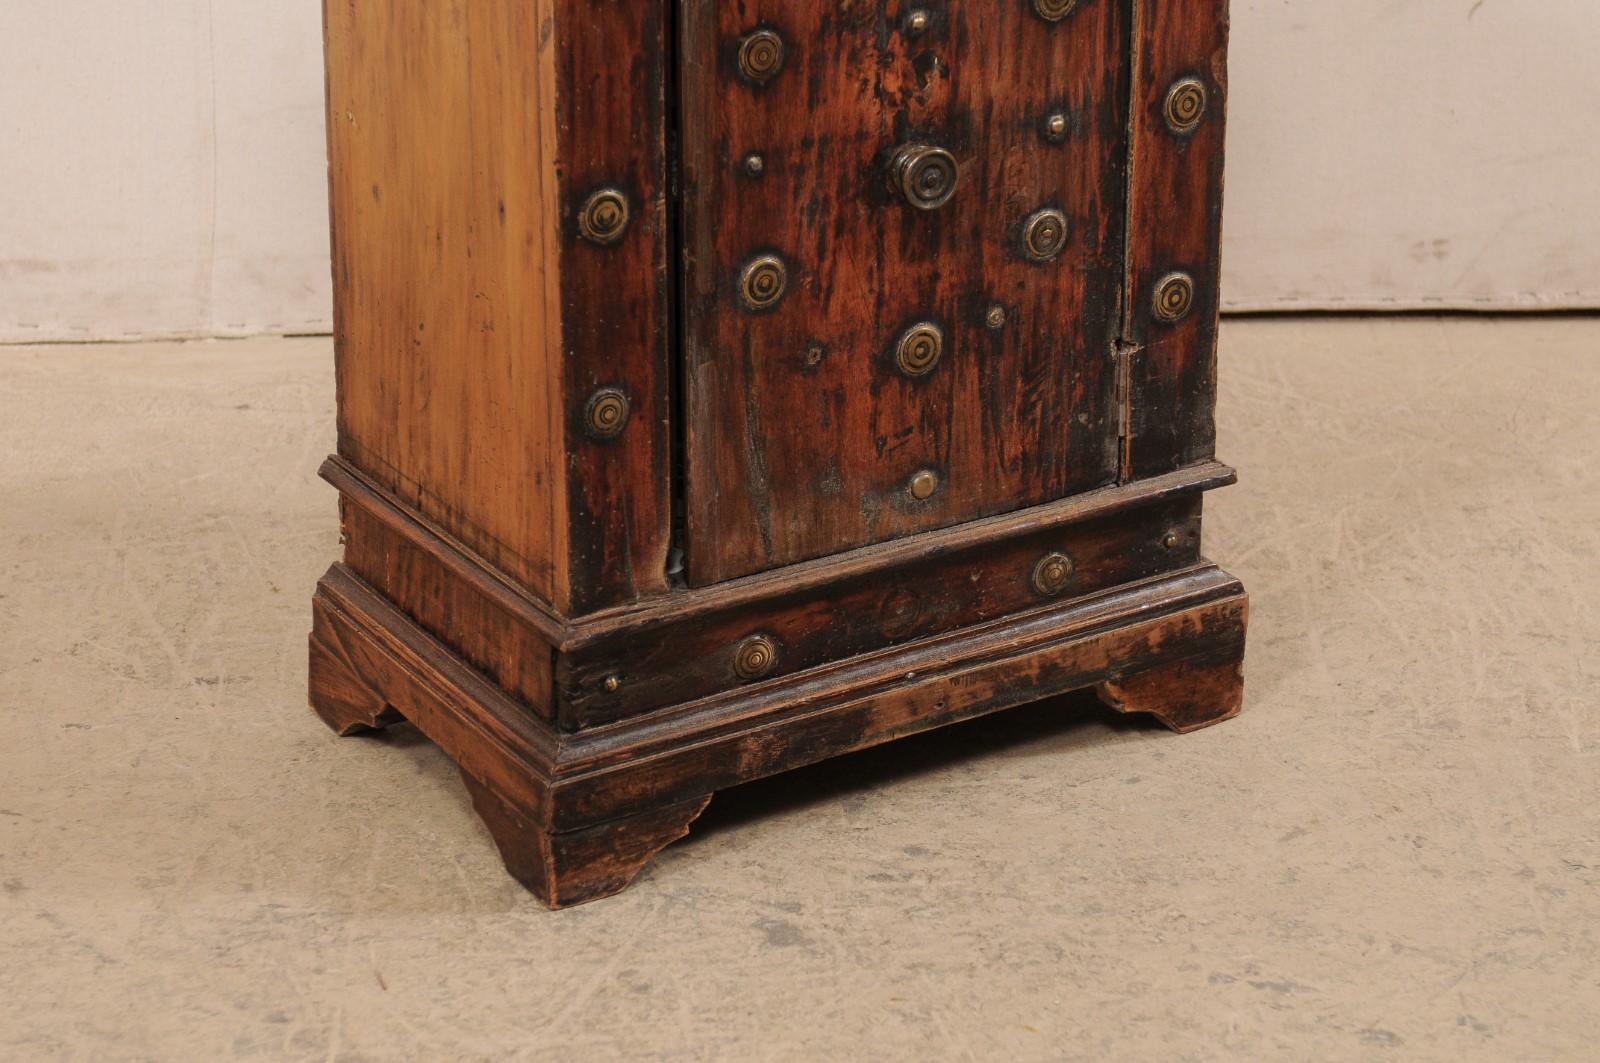 18th Century Italian Small-Sized Cabinet Adorn with Brass Medallion Accents In Good Condition For Sale In Atlanta, GA